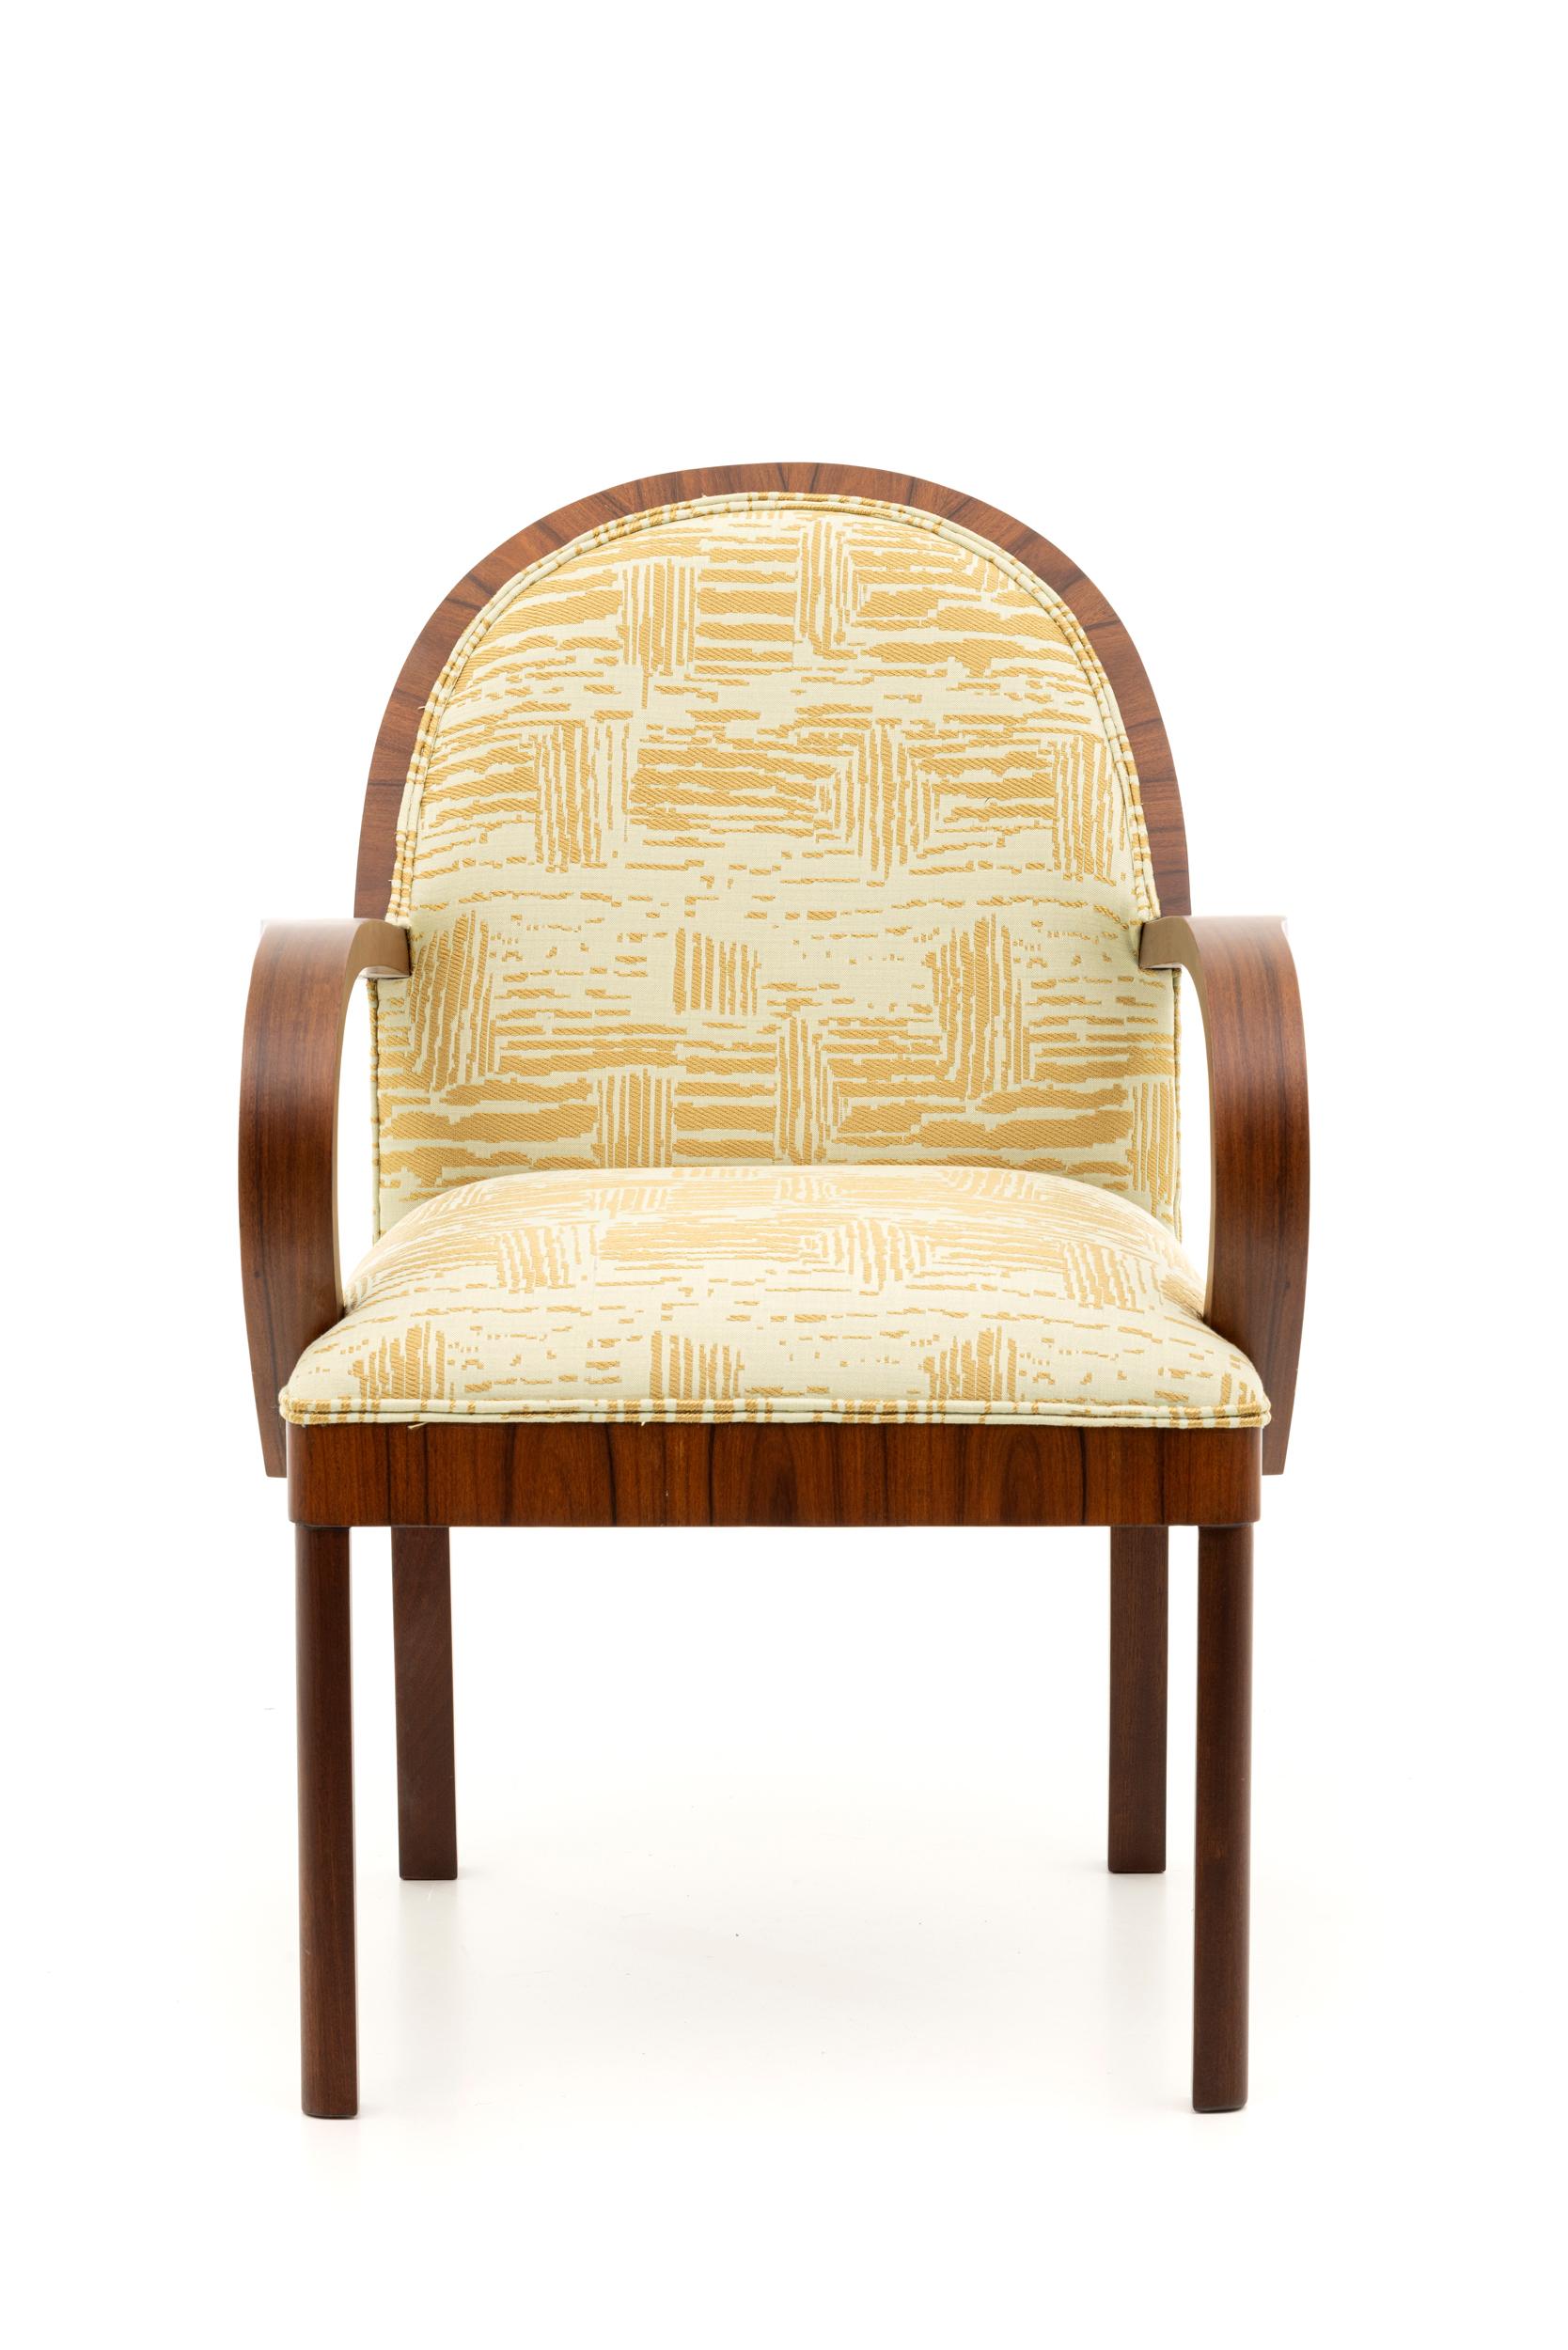 These very comfortable dining chairs were made in France in the 1930's. They have been fully restored and re-upholstered in a Le Manach made-to-order exclusive fabric in light blue and gold.

About the fabric:
At Ding Dong we prioritize using only